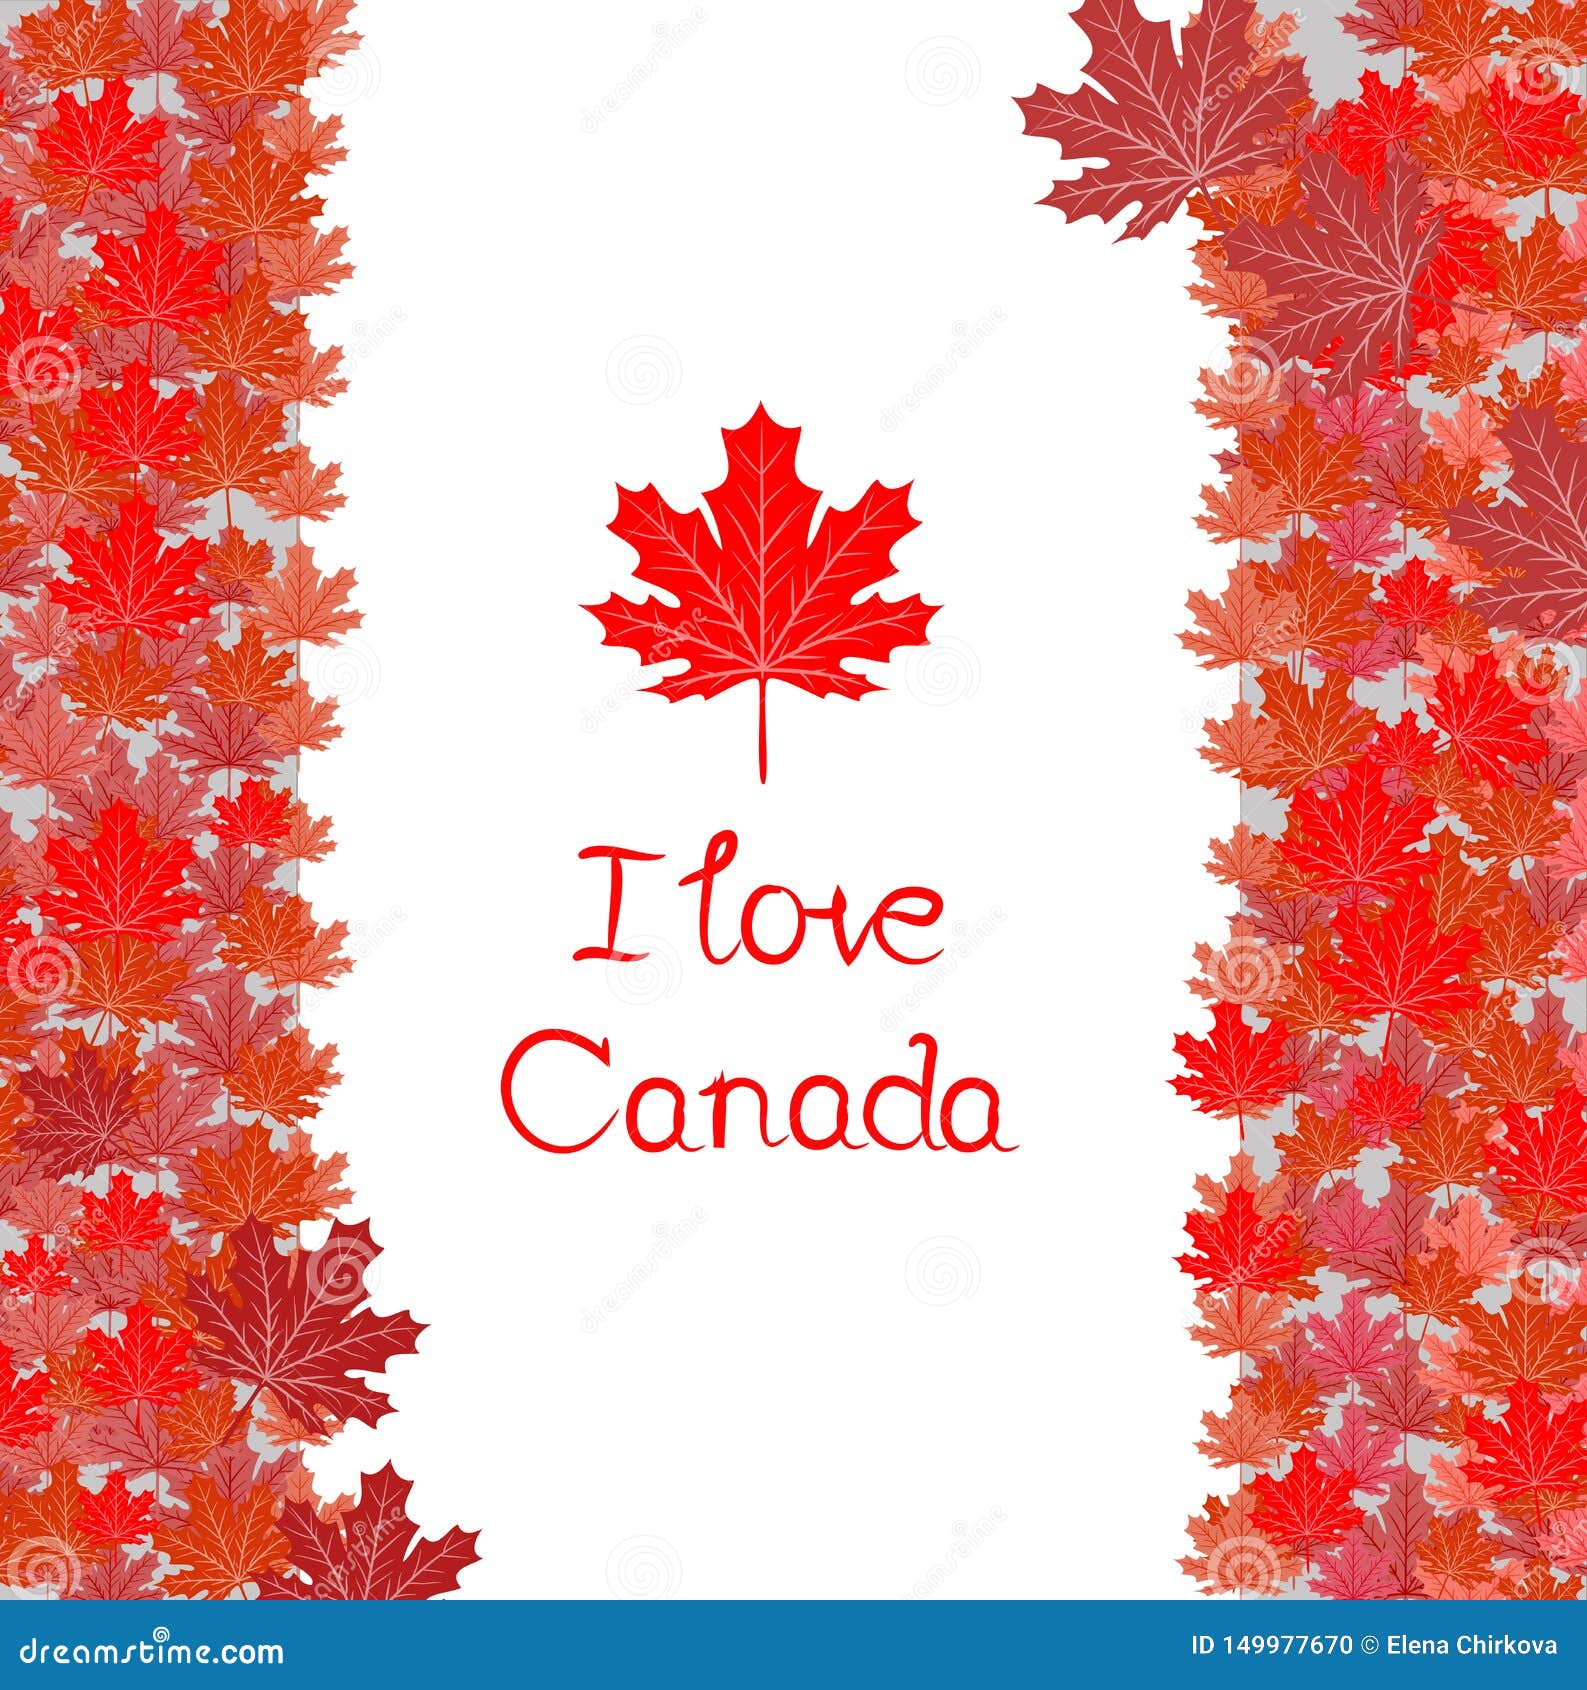 Happy Canada Day Vector Template With Maple Leaves Stock Vector ...